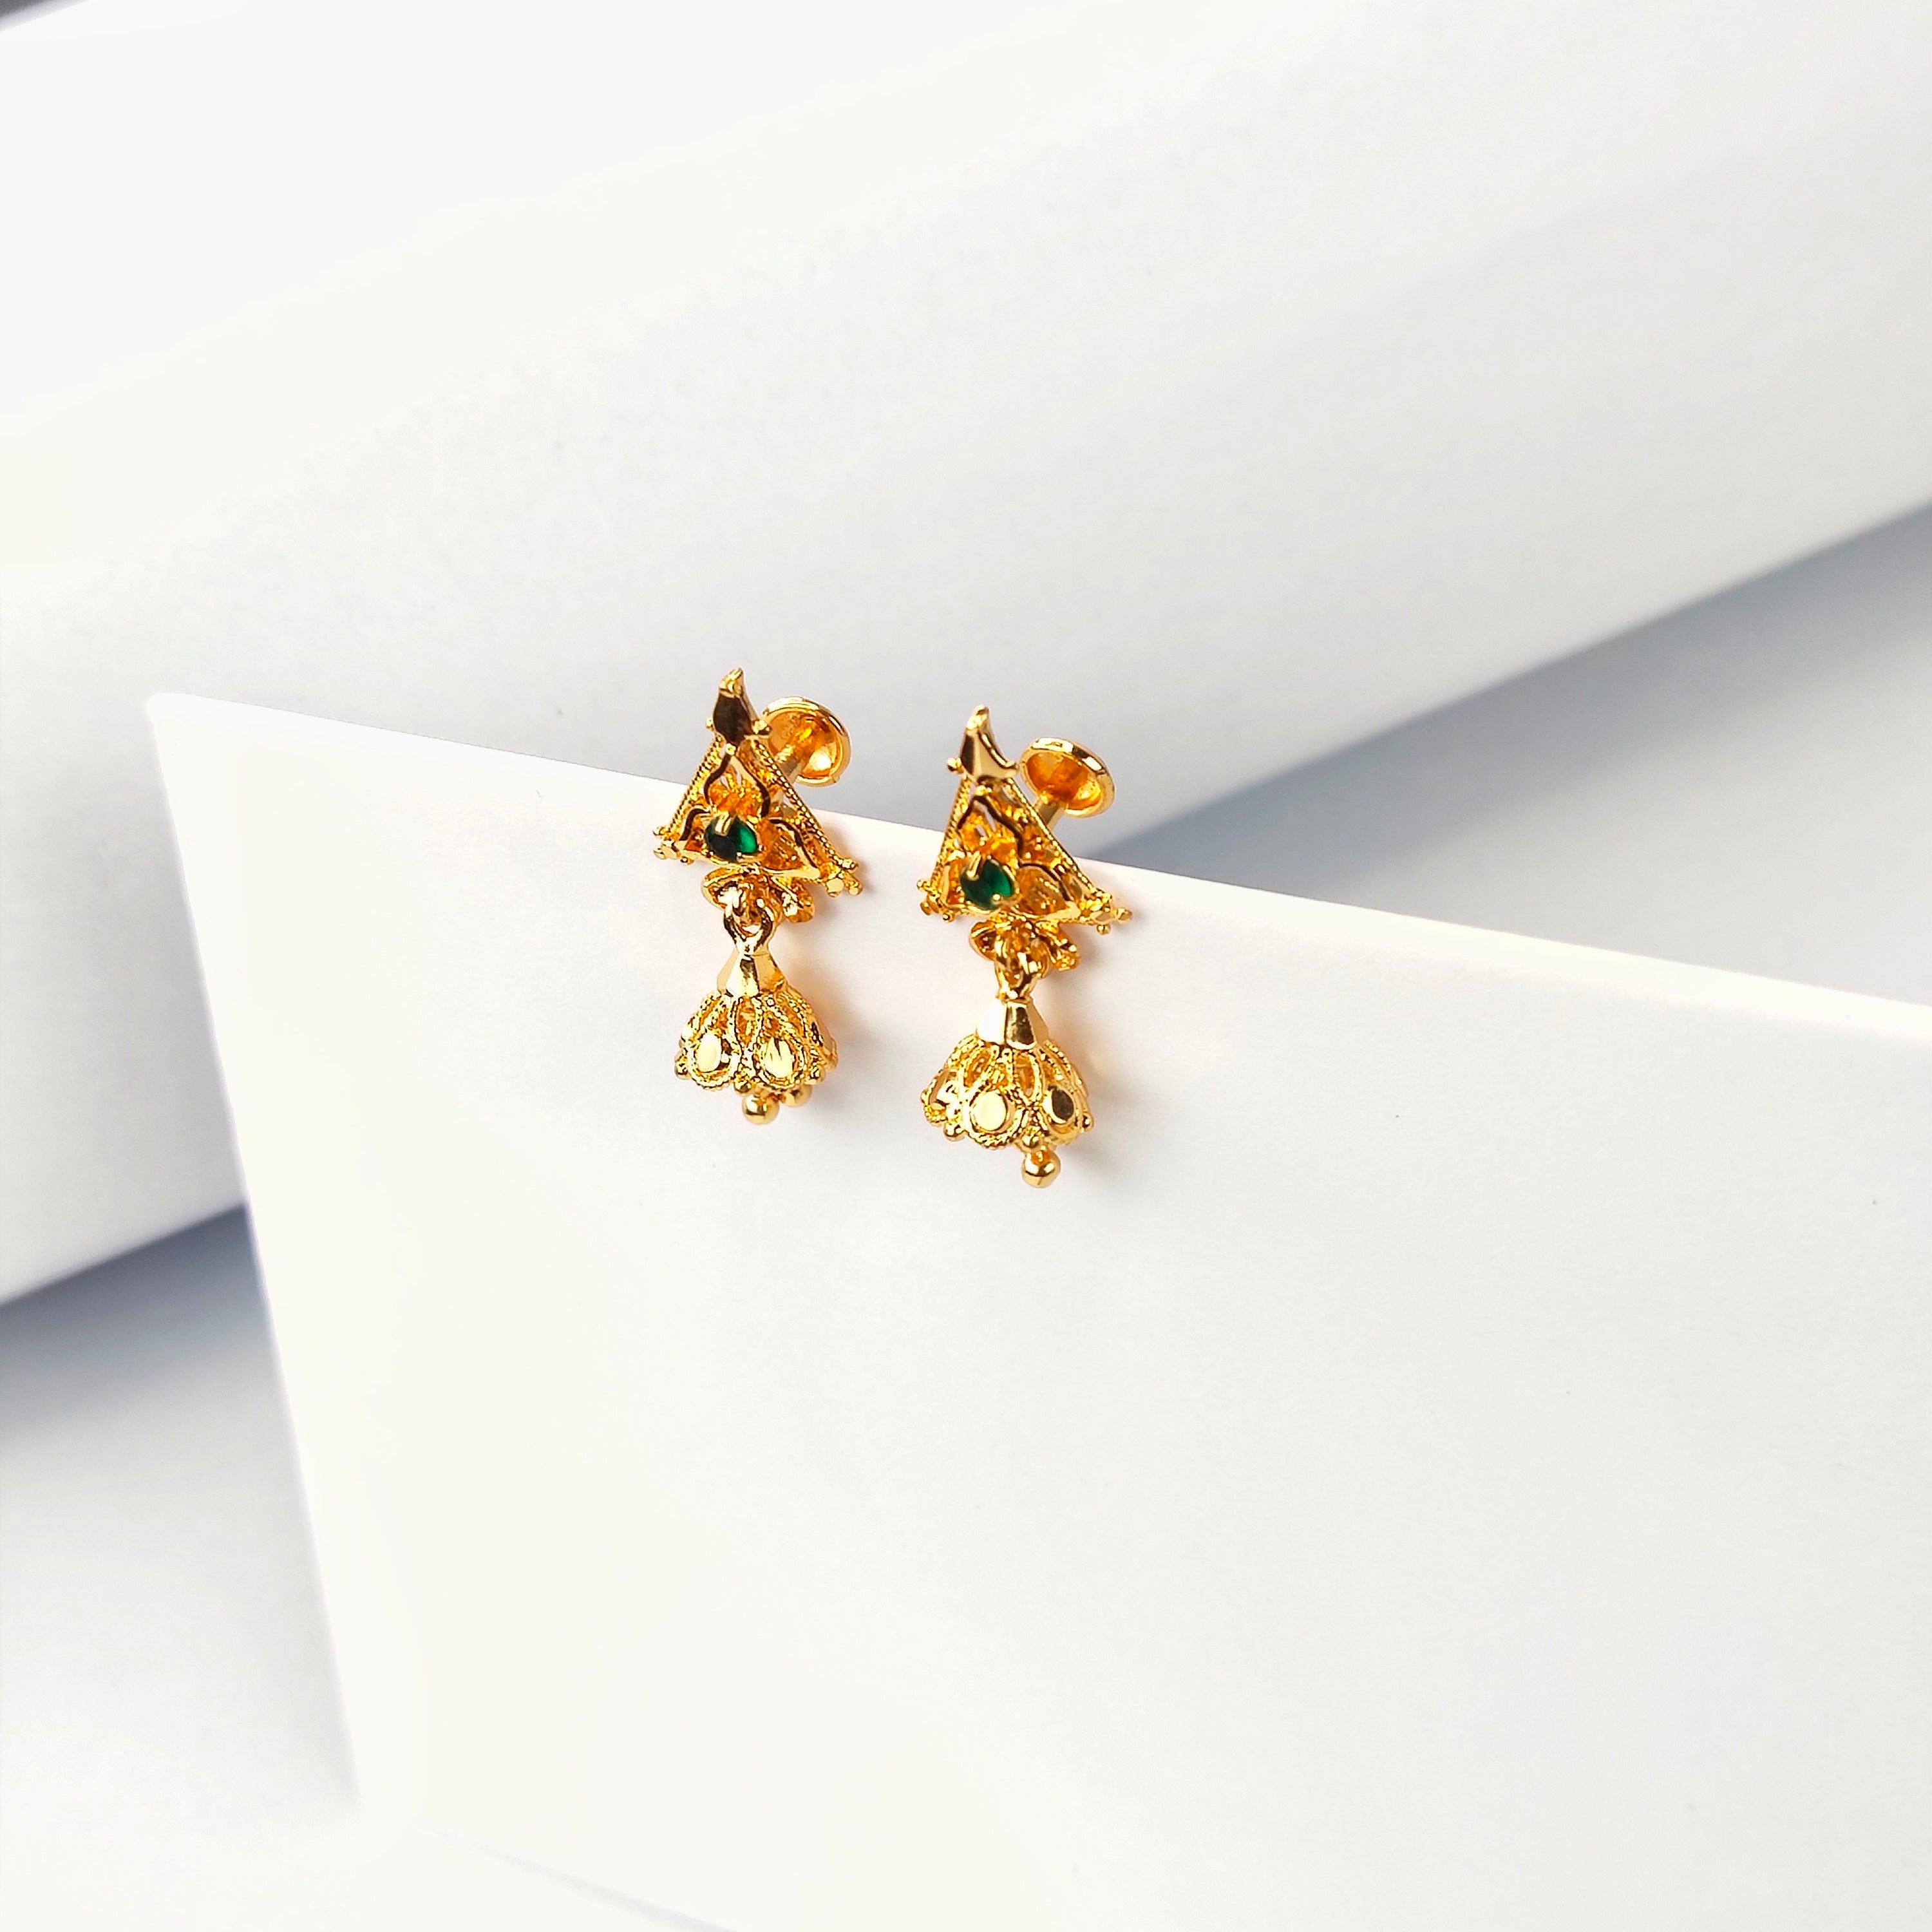 5 Beautiful Gold Earrings Designs For Daily Use